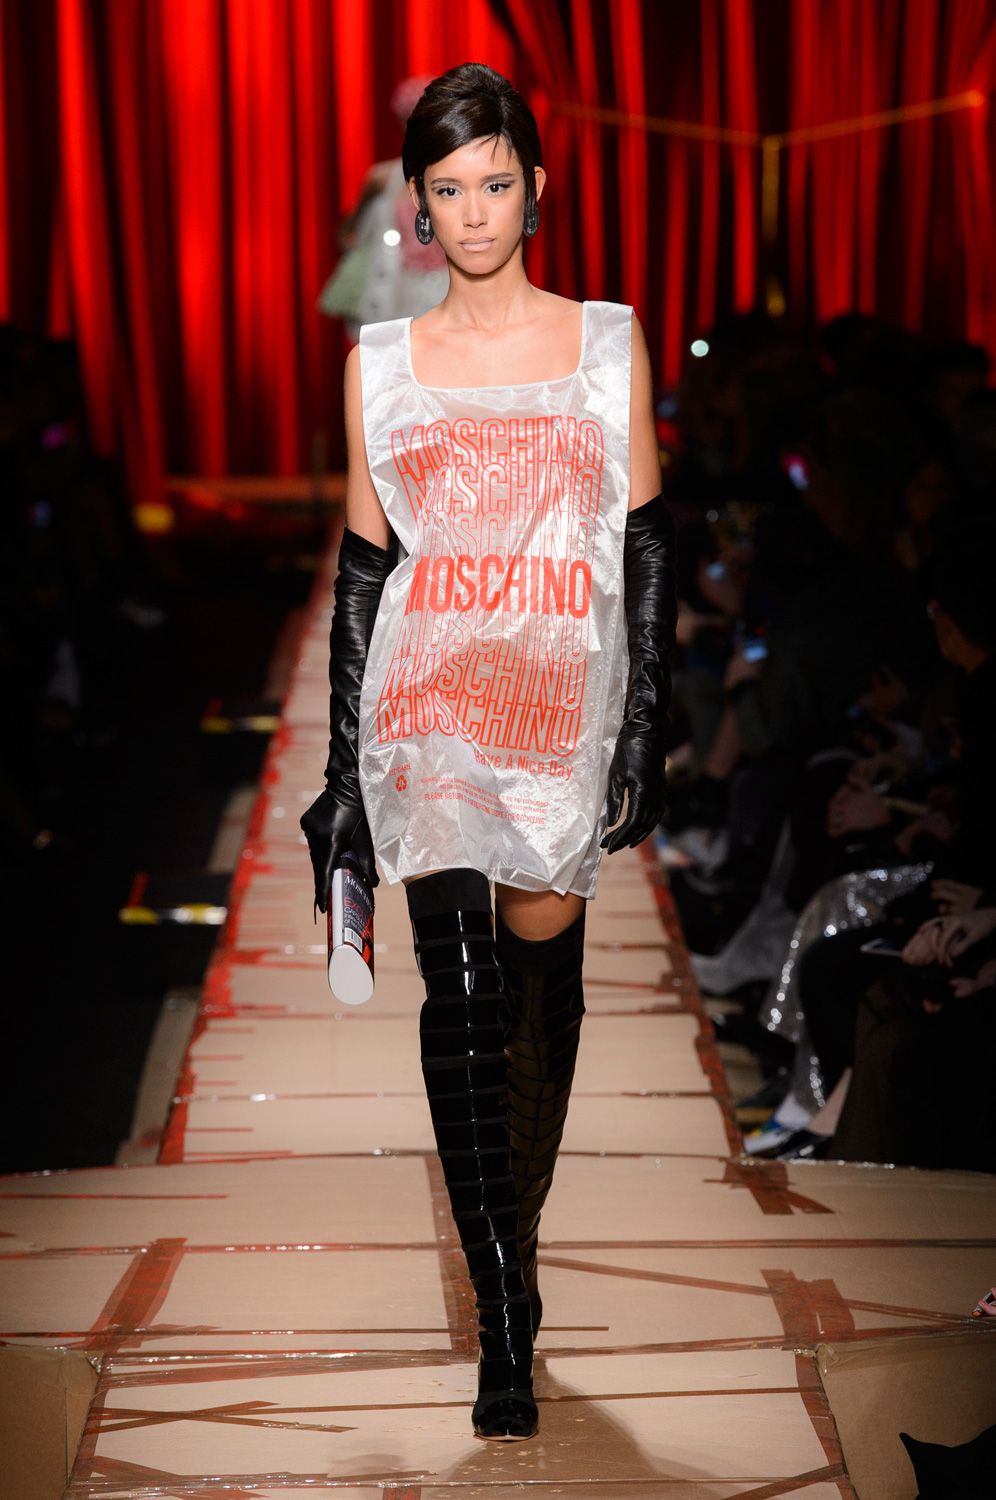 Moschino Bag Is a Roll of Toilet Paper 